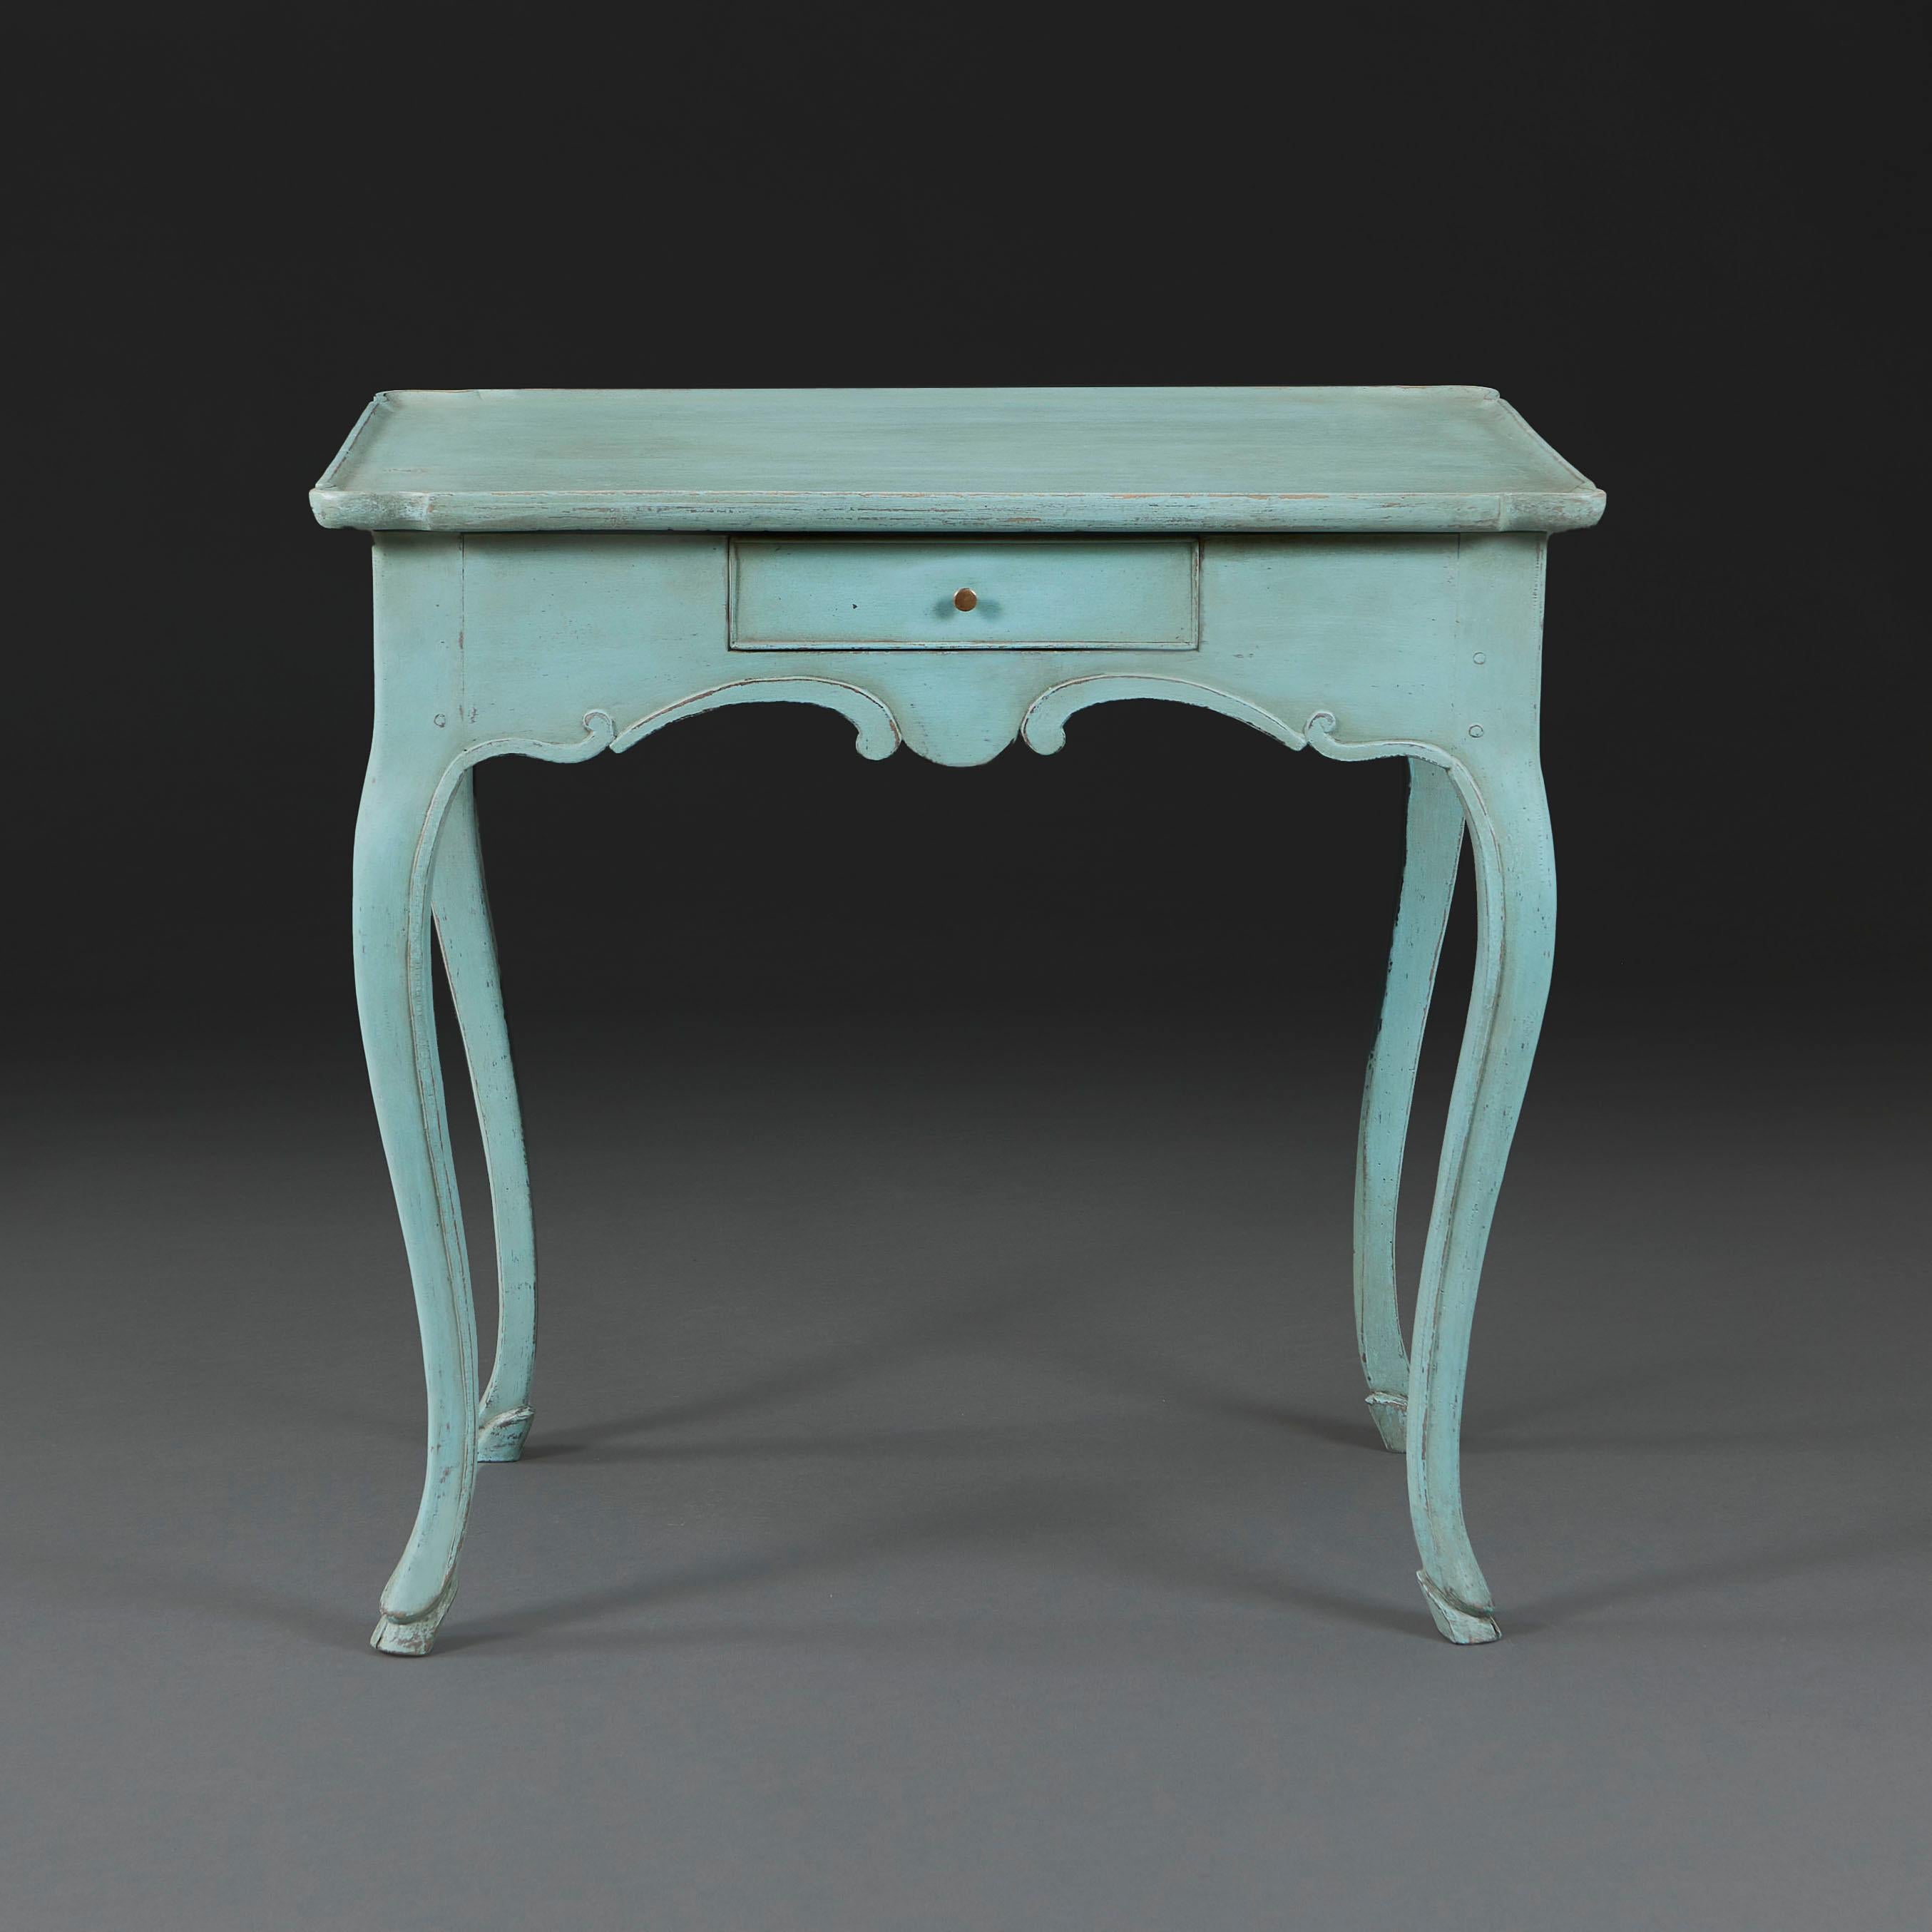 France, circa 1780

A late eighteenth century Louis XVI table with scrolling legs, the top with scalloped corners and with single drawer to the frieze, the legs terminating in hoof feet, with later blue paintwork.

Height 72.00cm
Width 77.00cm
Depth